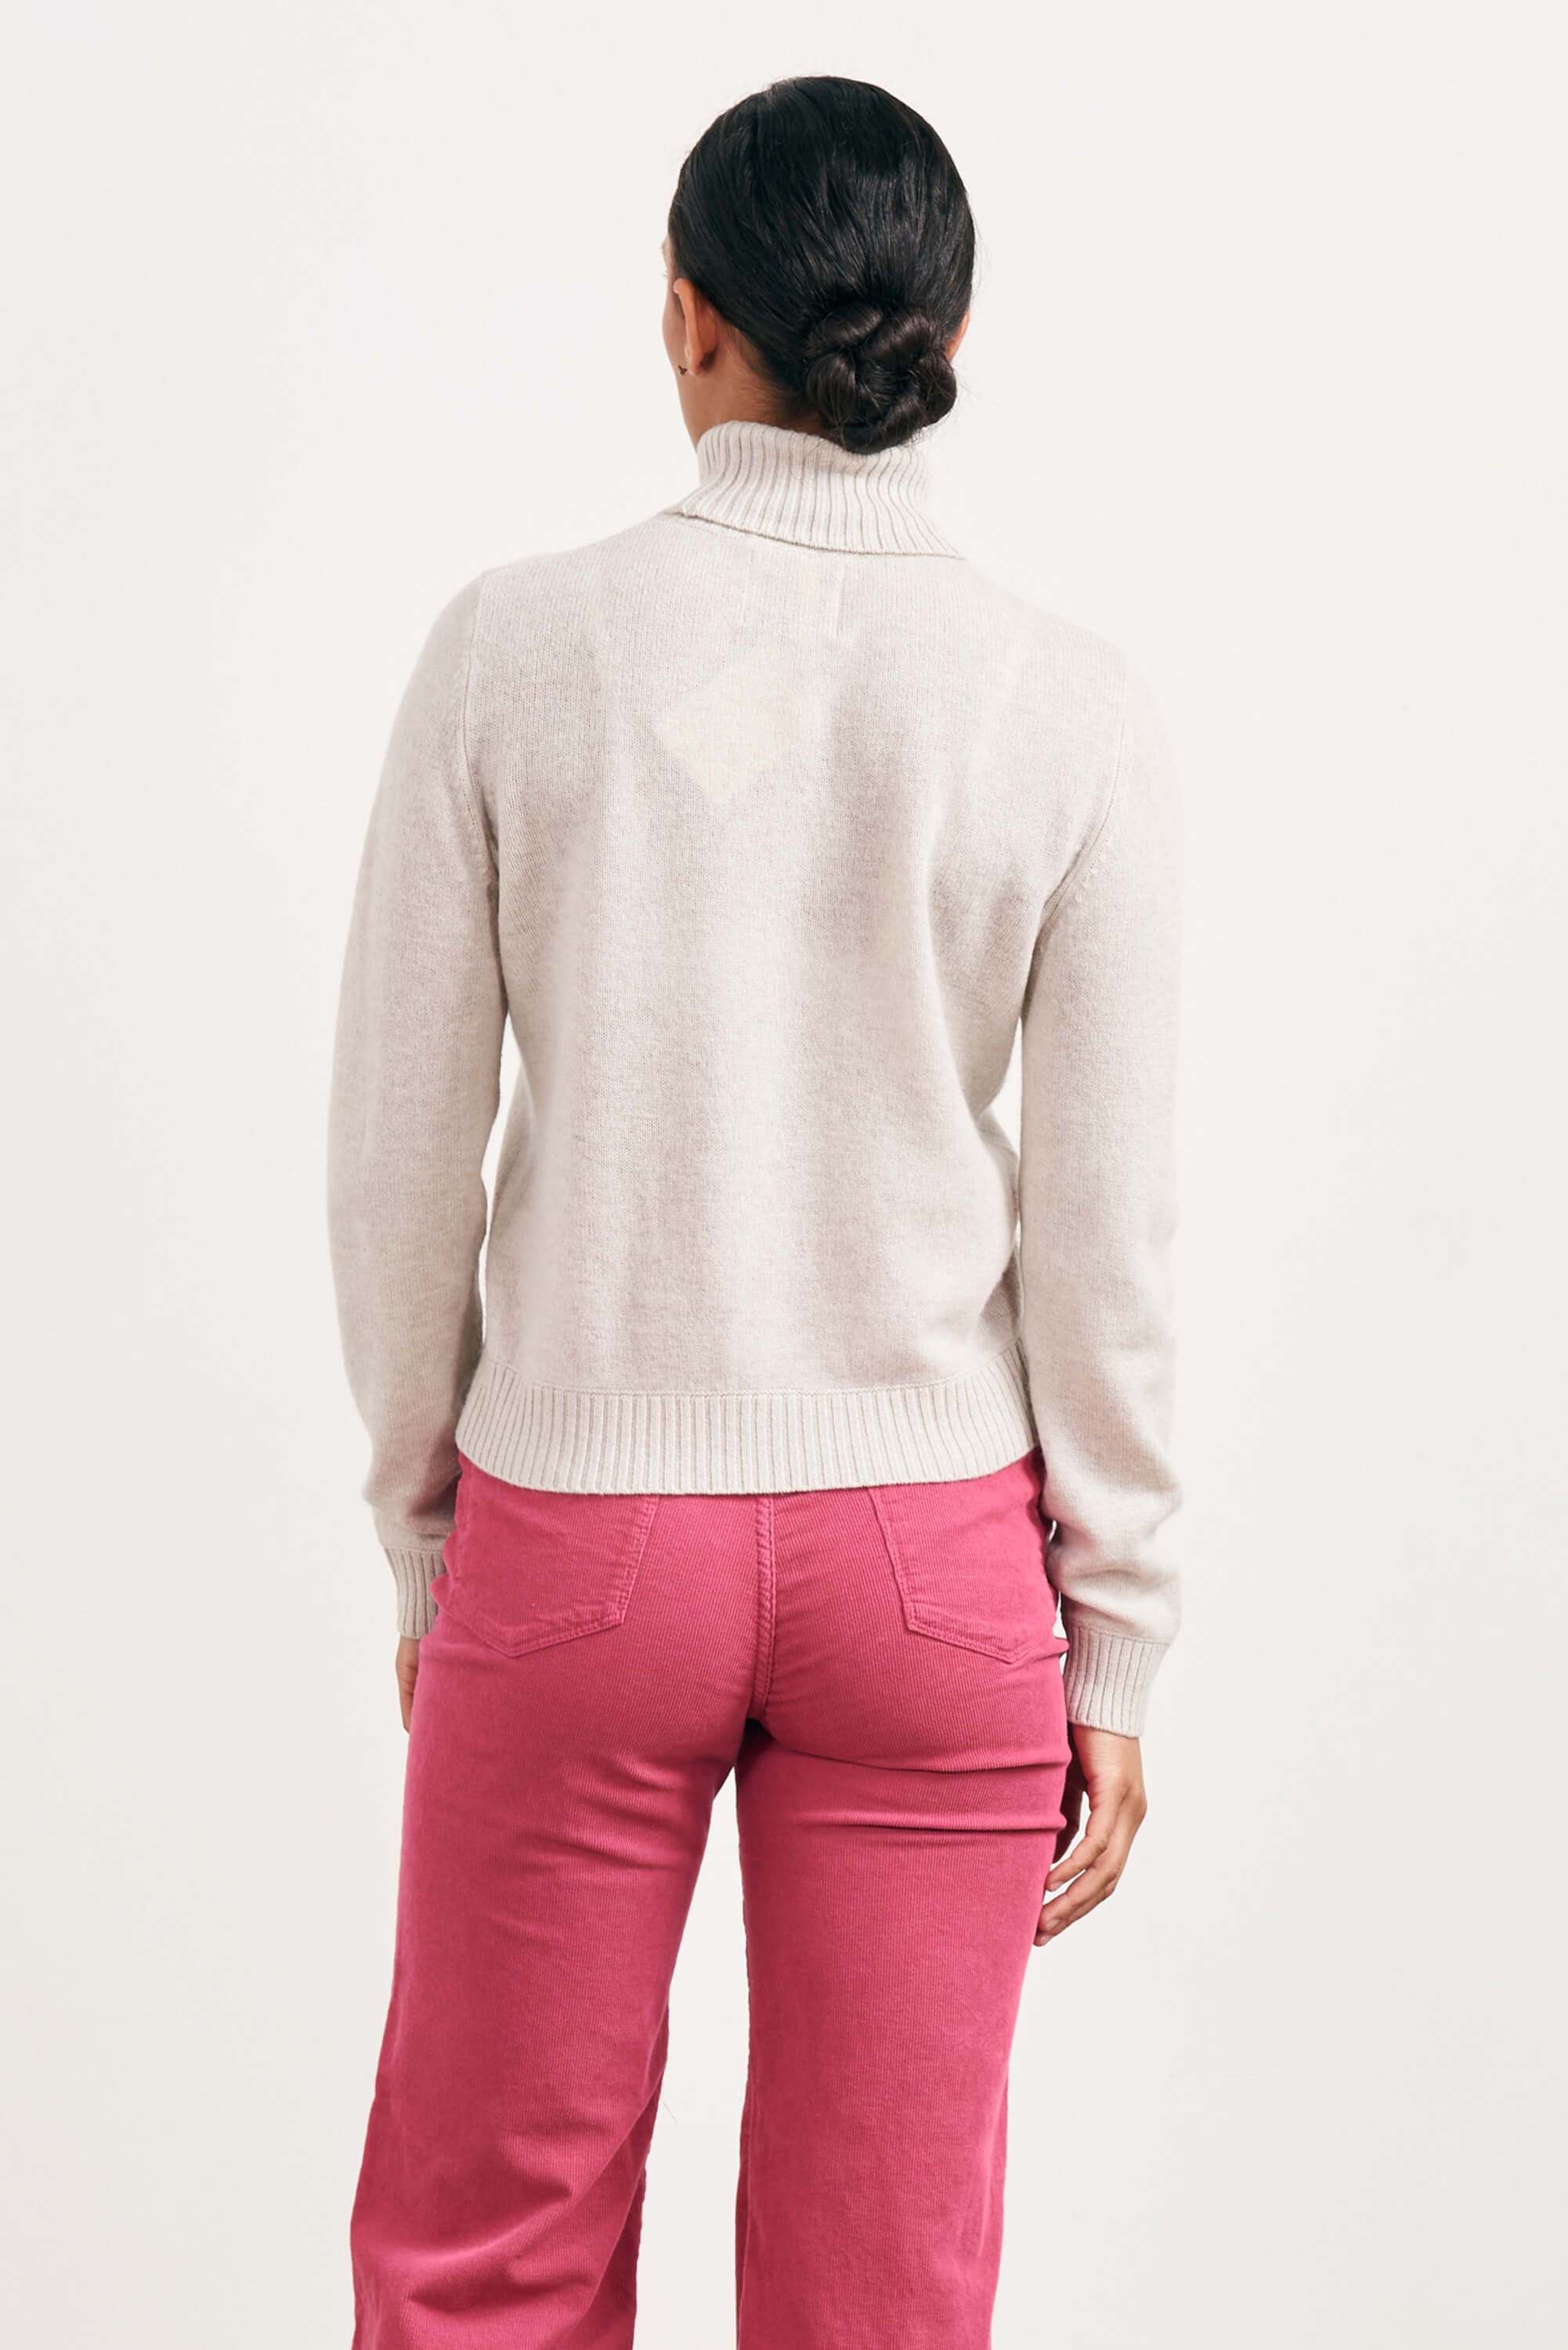 Brown haired female model wearing Jumper1234 lightweight cashmere roll neck in cream facing away from the camera